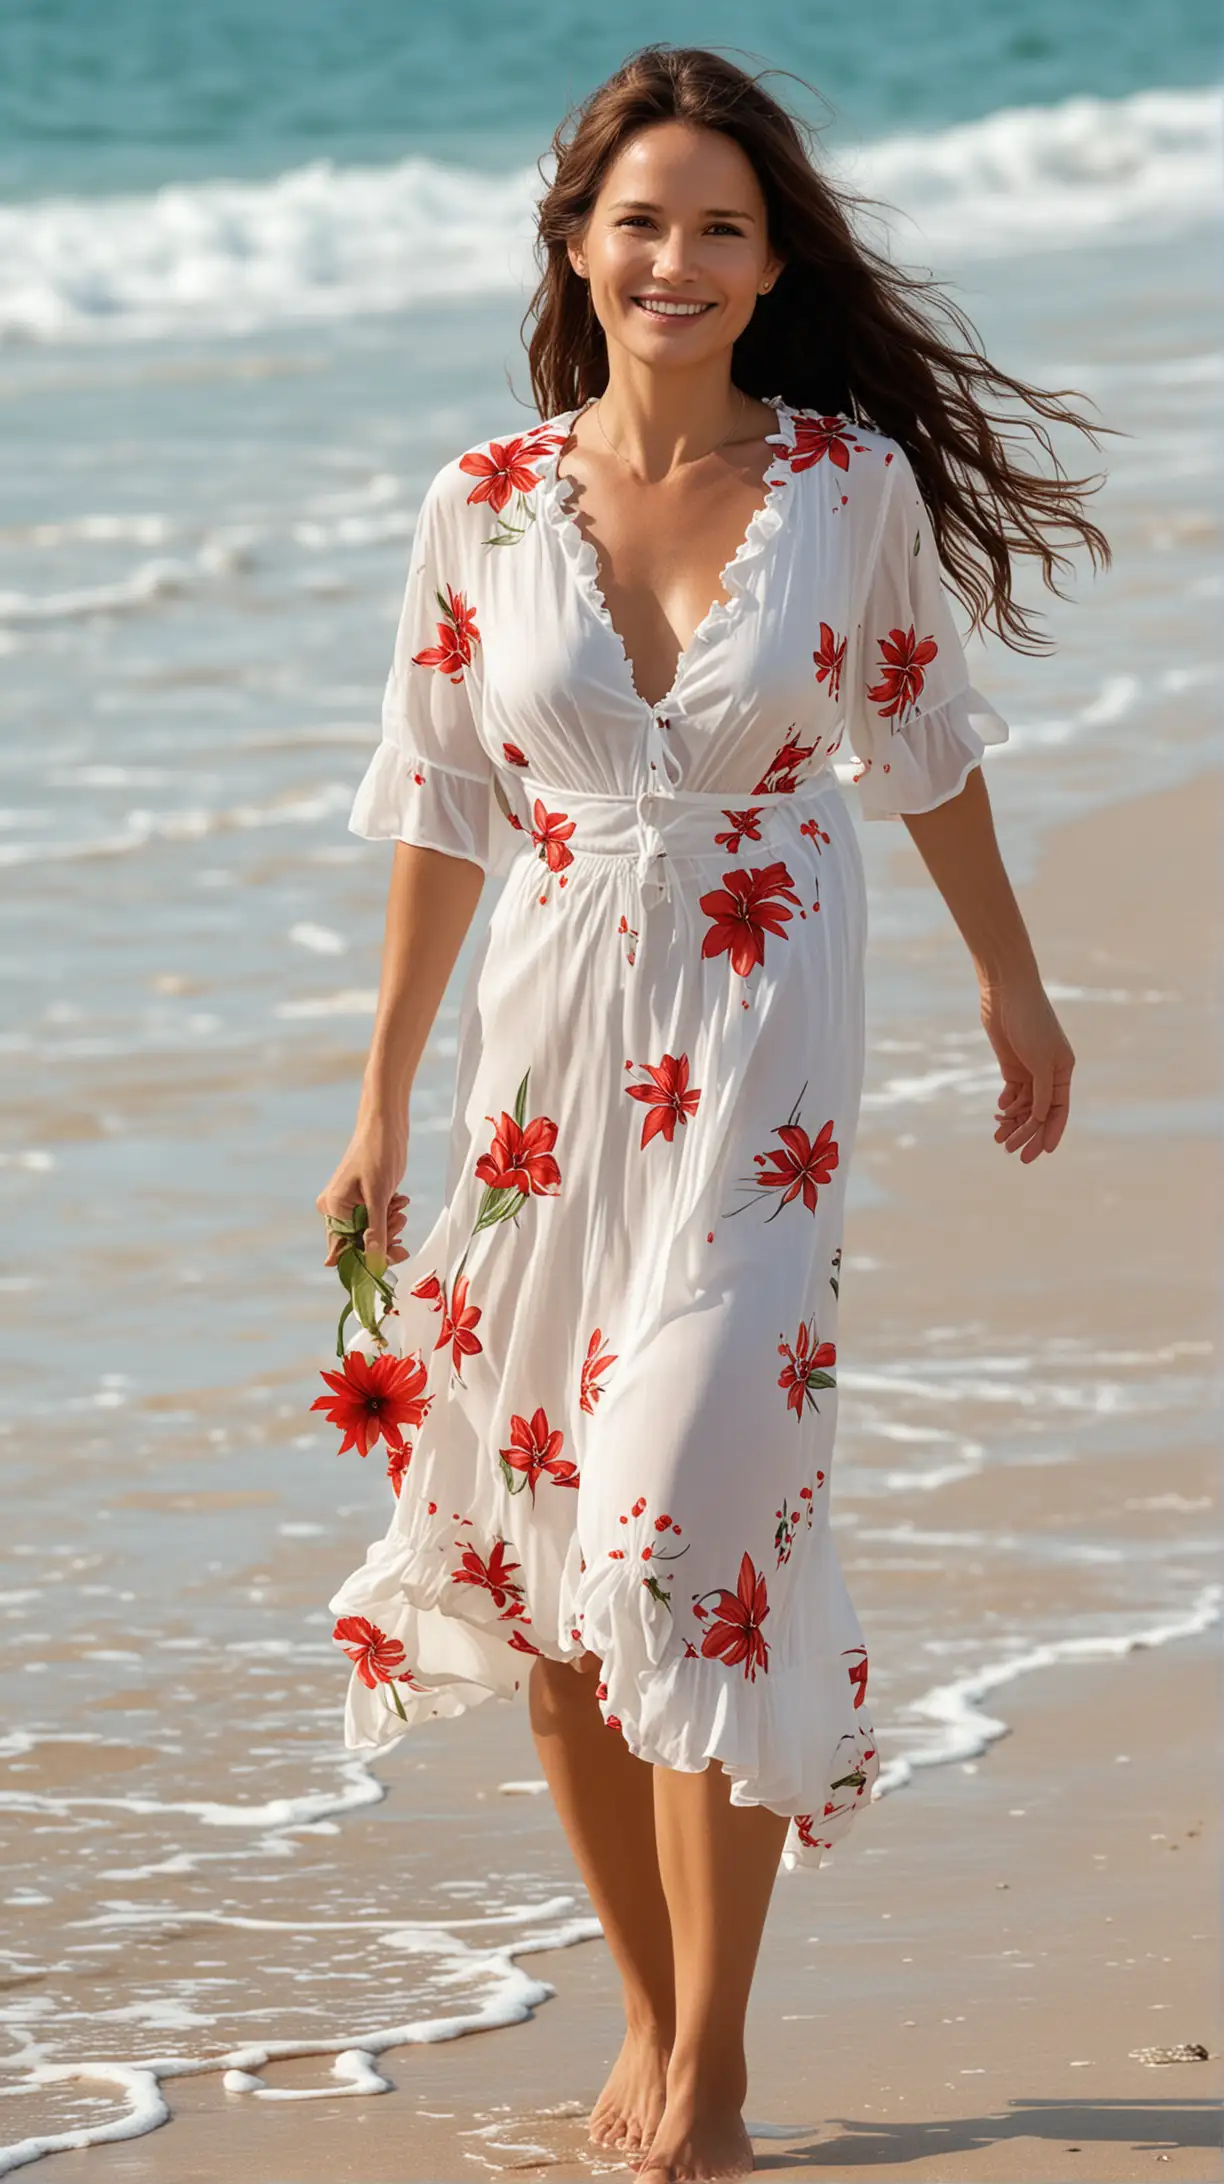 Stunning Virginie Ledoyen in White Tropical Dress with Red Flower at Beach